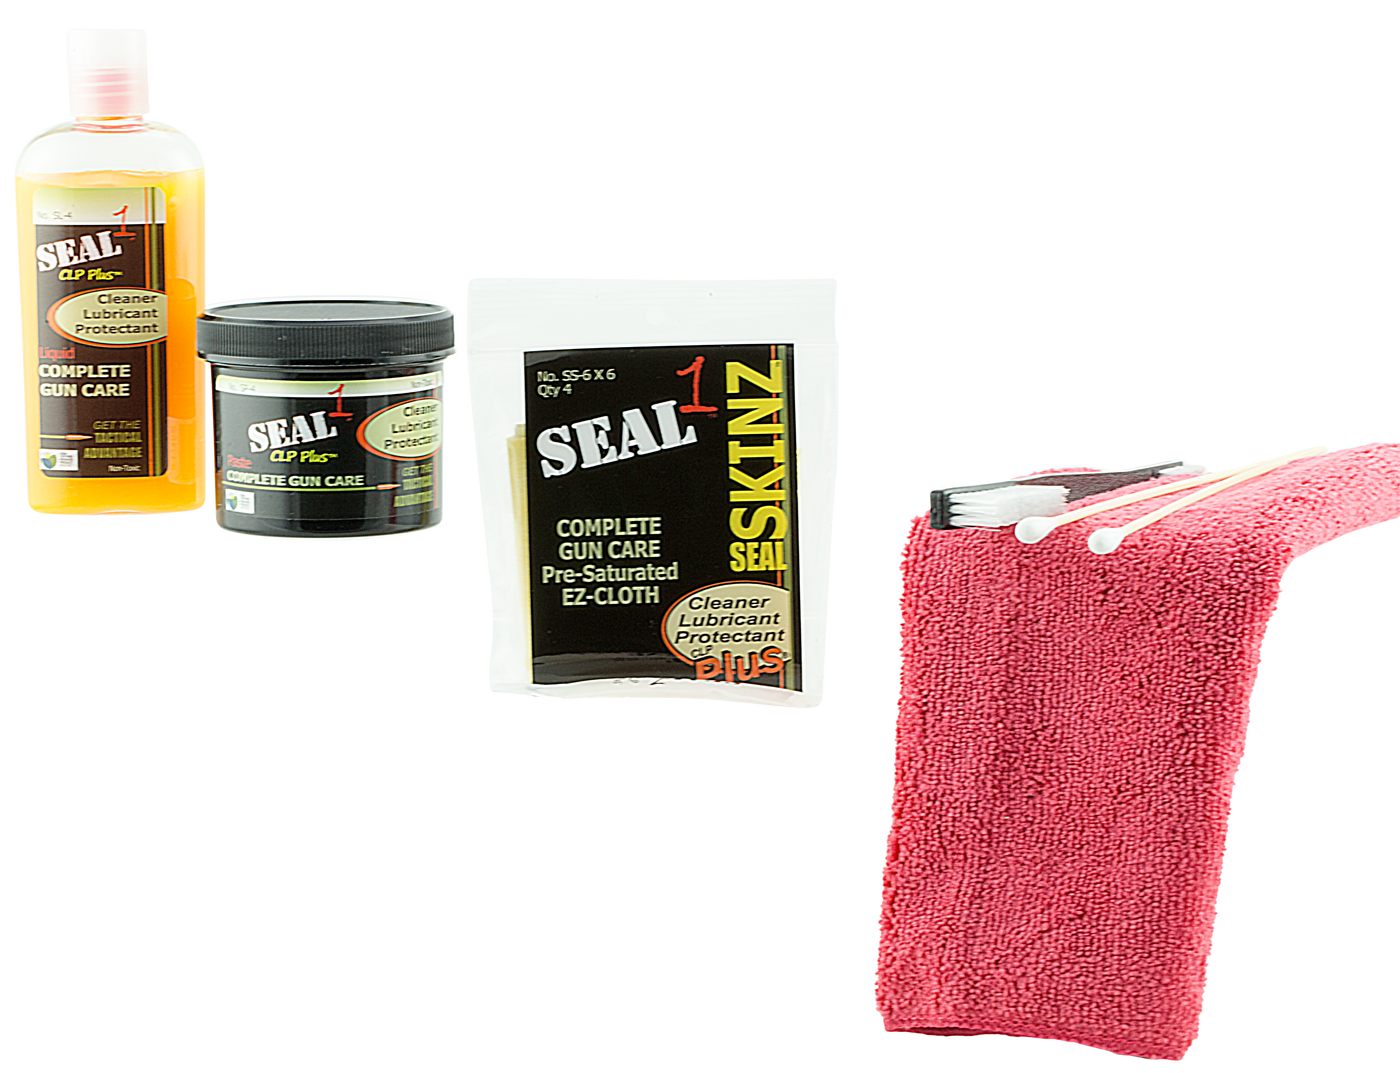 Seal 1 Complete Tactical, Seal1 Skit-4   Complete Tact Gn Care Kit